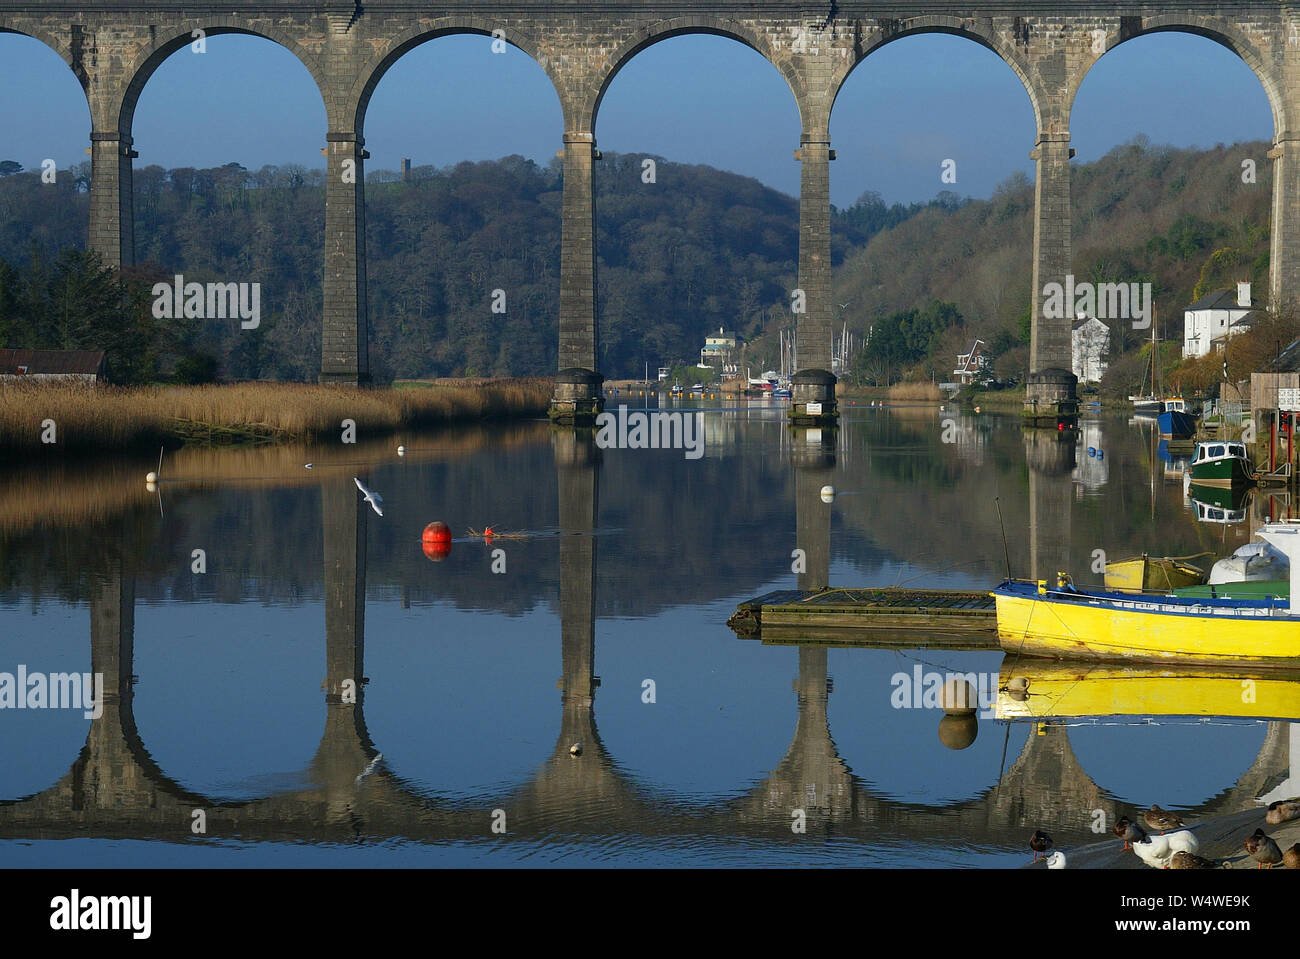 27.01.2004 - The railway viaduct that links Devon to Cornwall across the River Tamar at Calstock, Cornwall, UK. Stock Photo